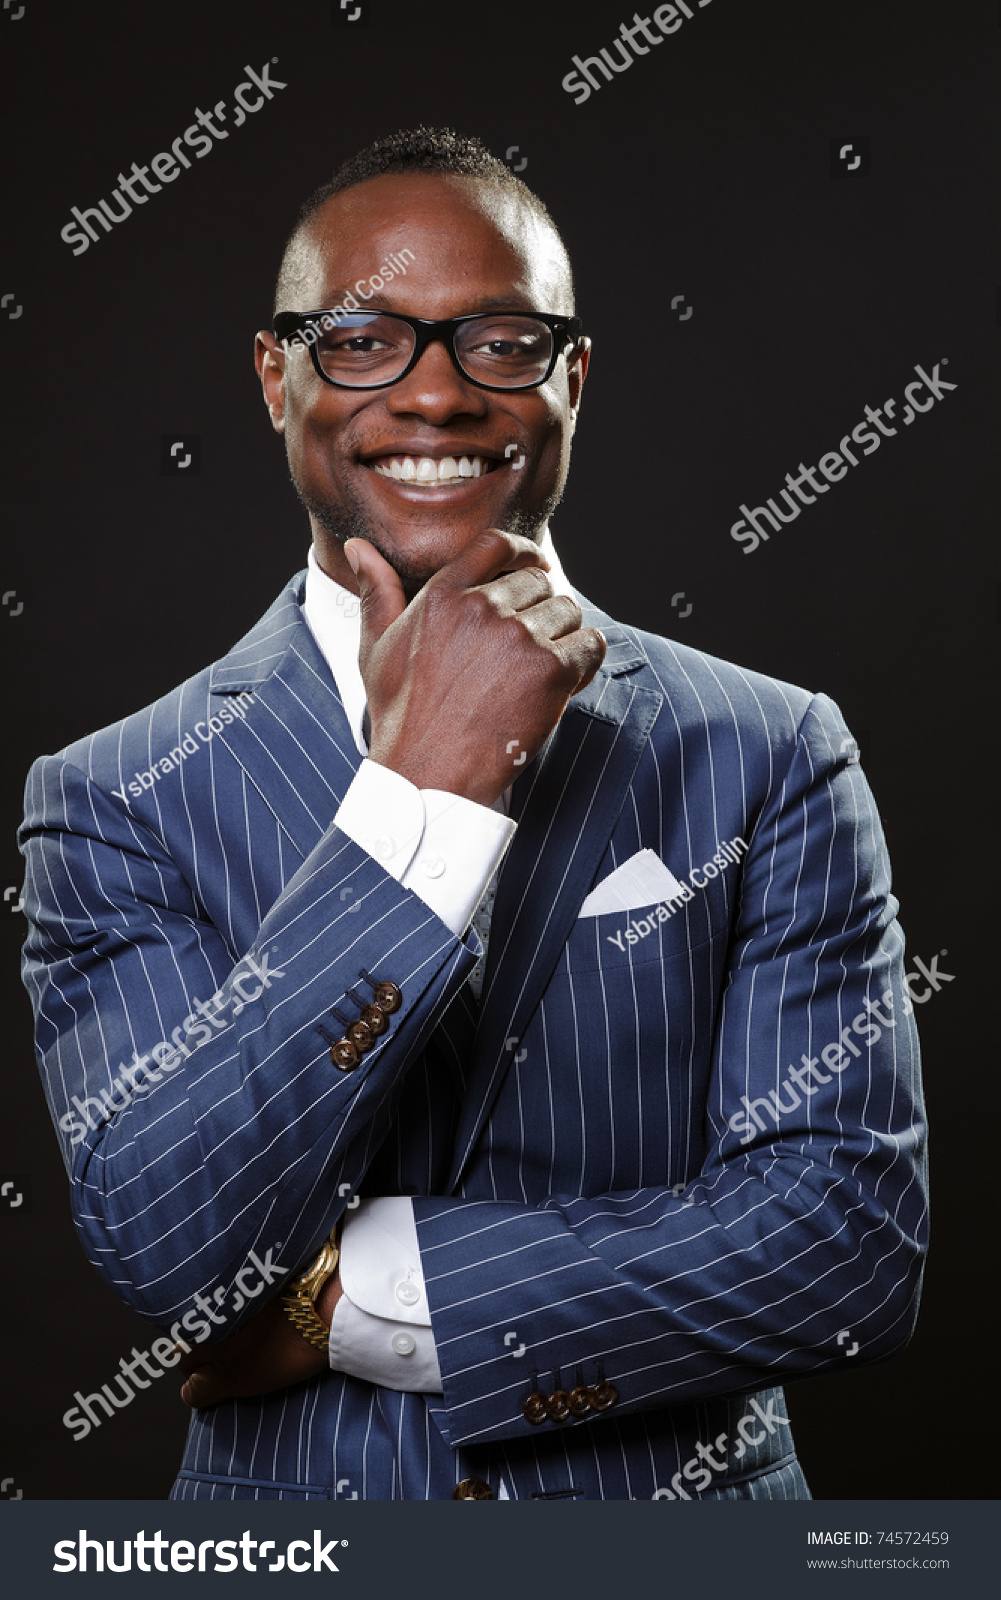 Smiling Young Black Business Man Wearing Suit And Glasses. Stock Photo ...